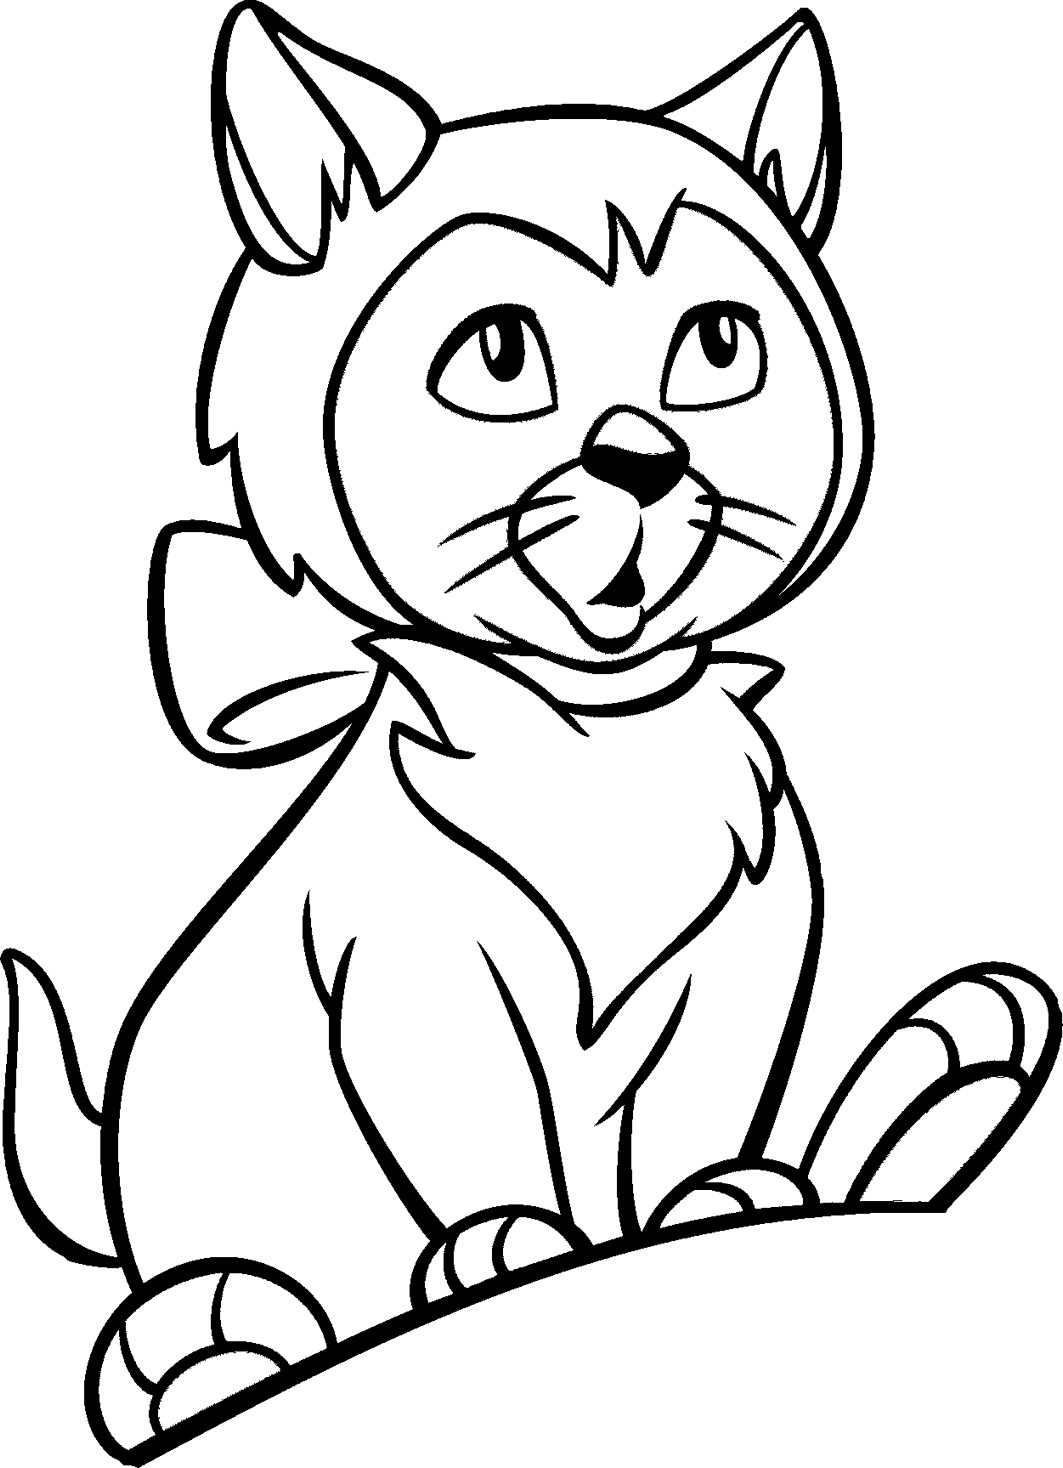 Coloring Pages For Kids Cat
 Coloring Pages for Kids Cat Coloring Pages for Kids